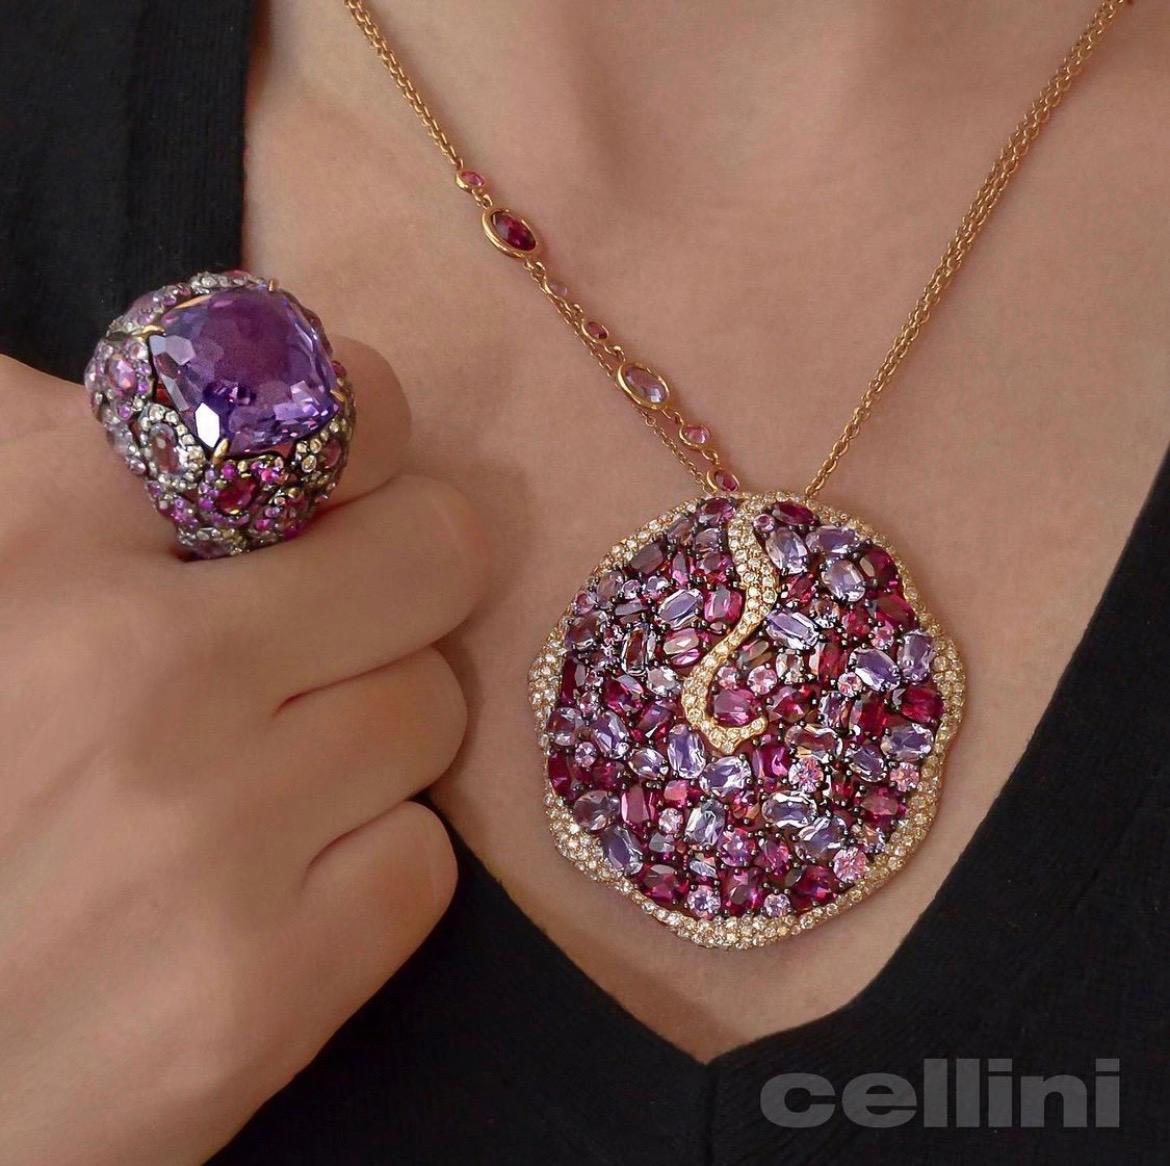 Rodney Rayner is known for his unique styling and use of beautiful color combinations. This 18 karat rose gold pendant necklace is a perfect example of his work. Various shades of oval rhodolite and amethyst stones are set in the organic shaped